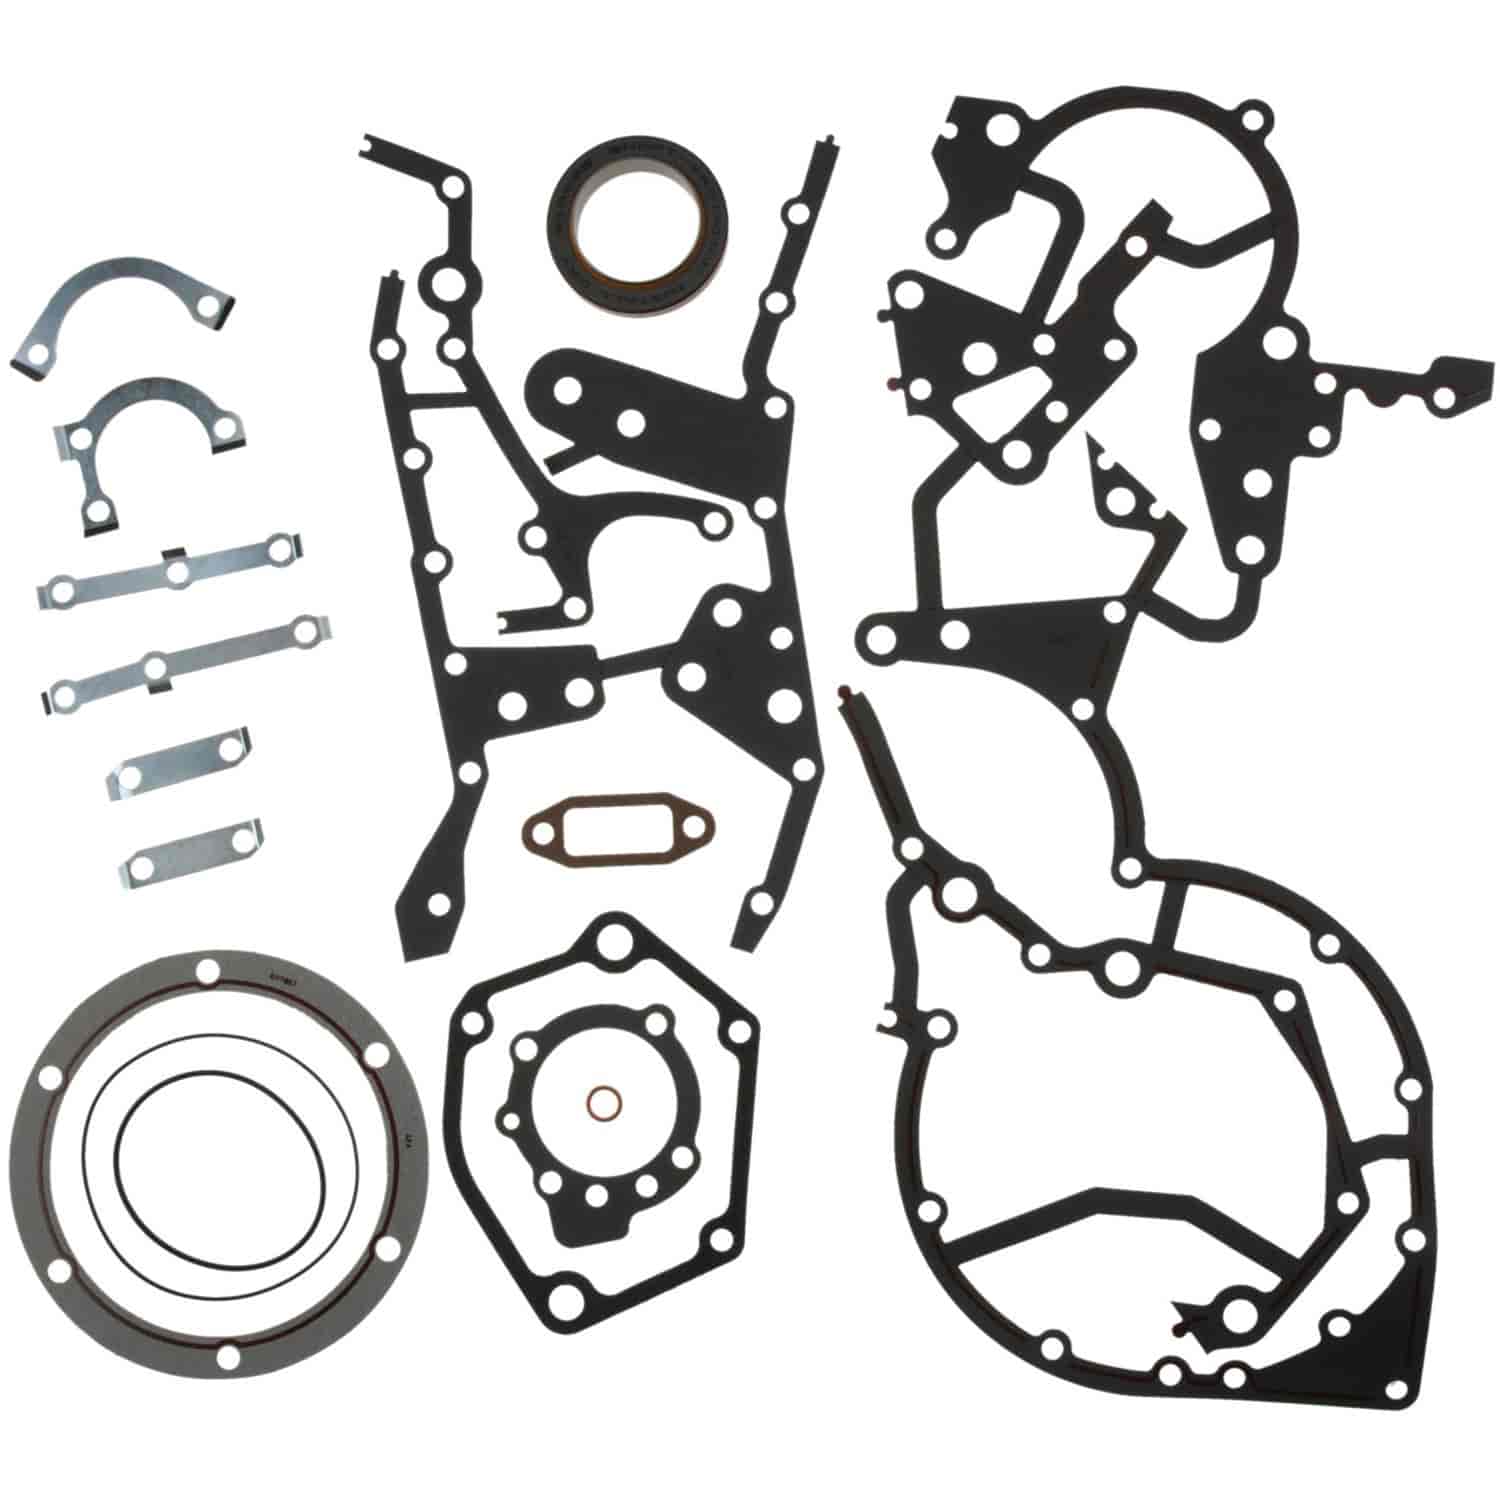 Timing Cover Set Caterpillar 3304 and 3306 Engine Series